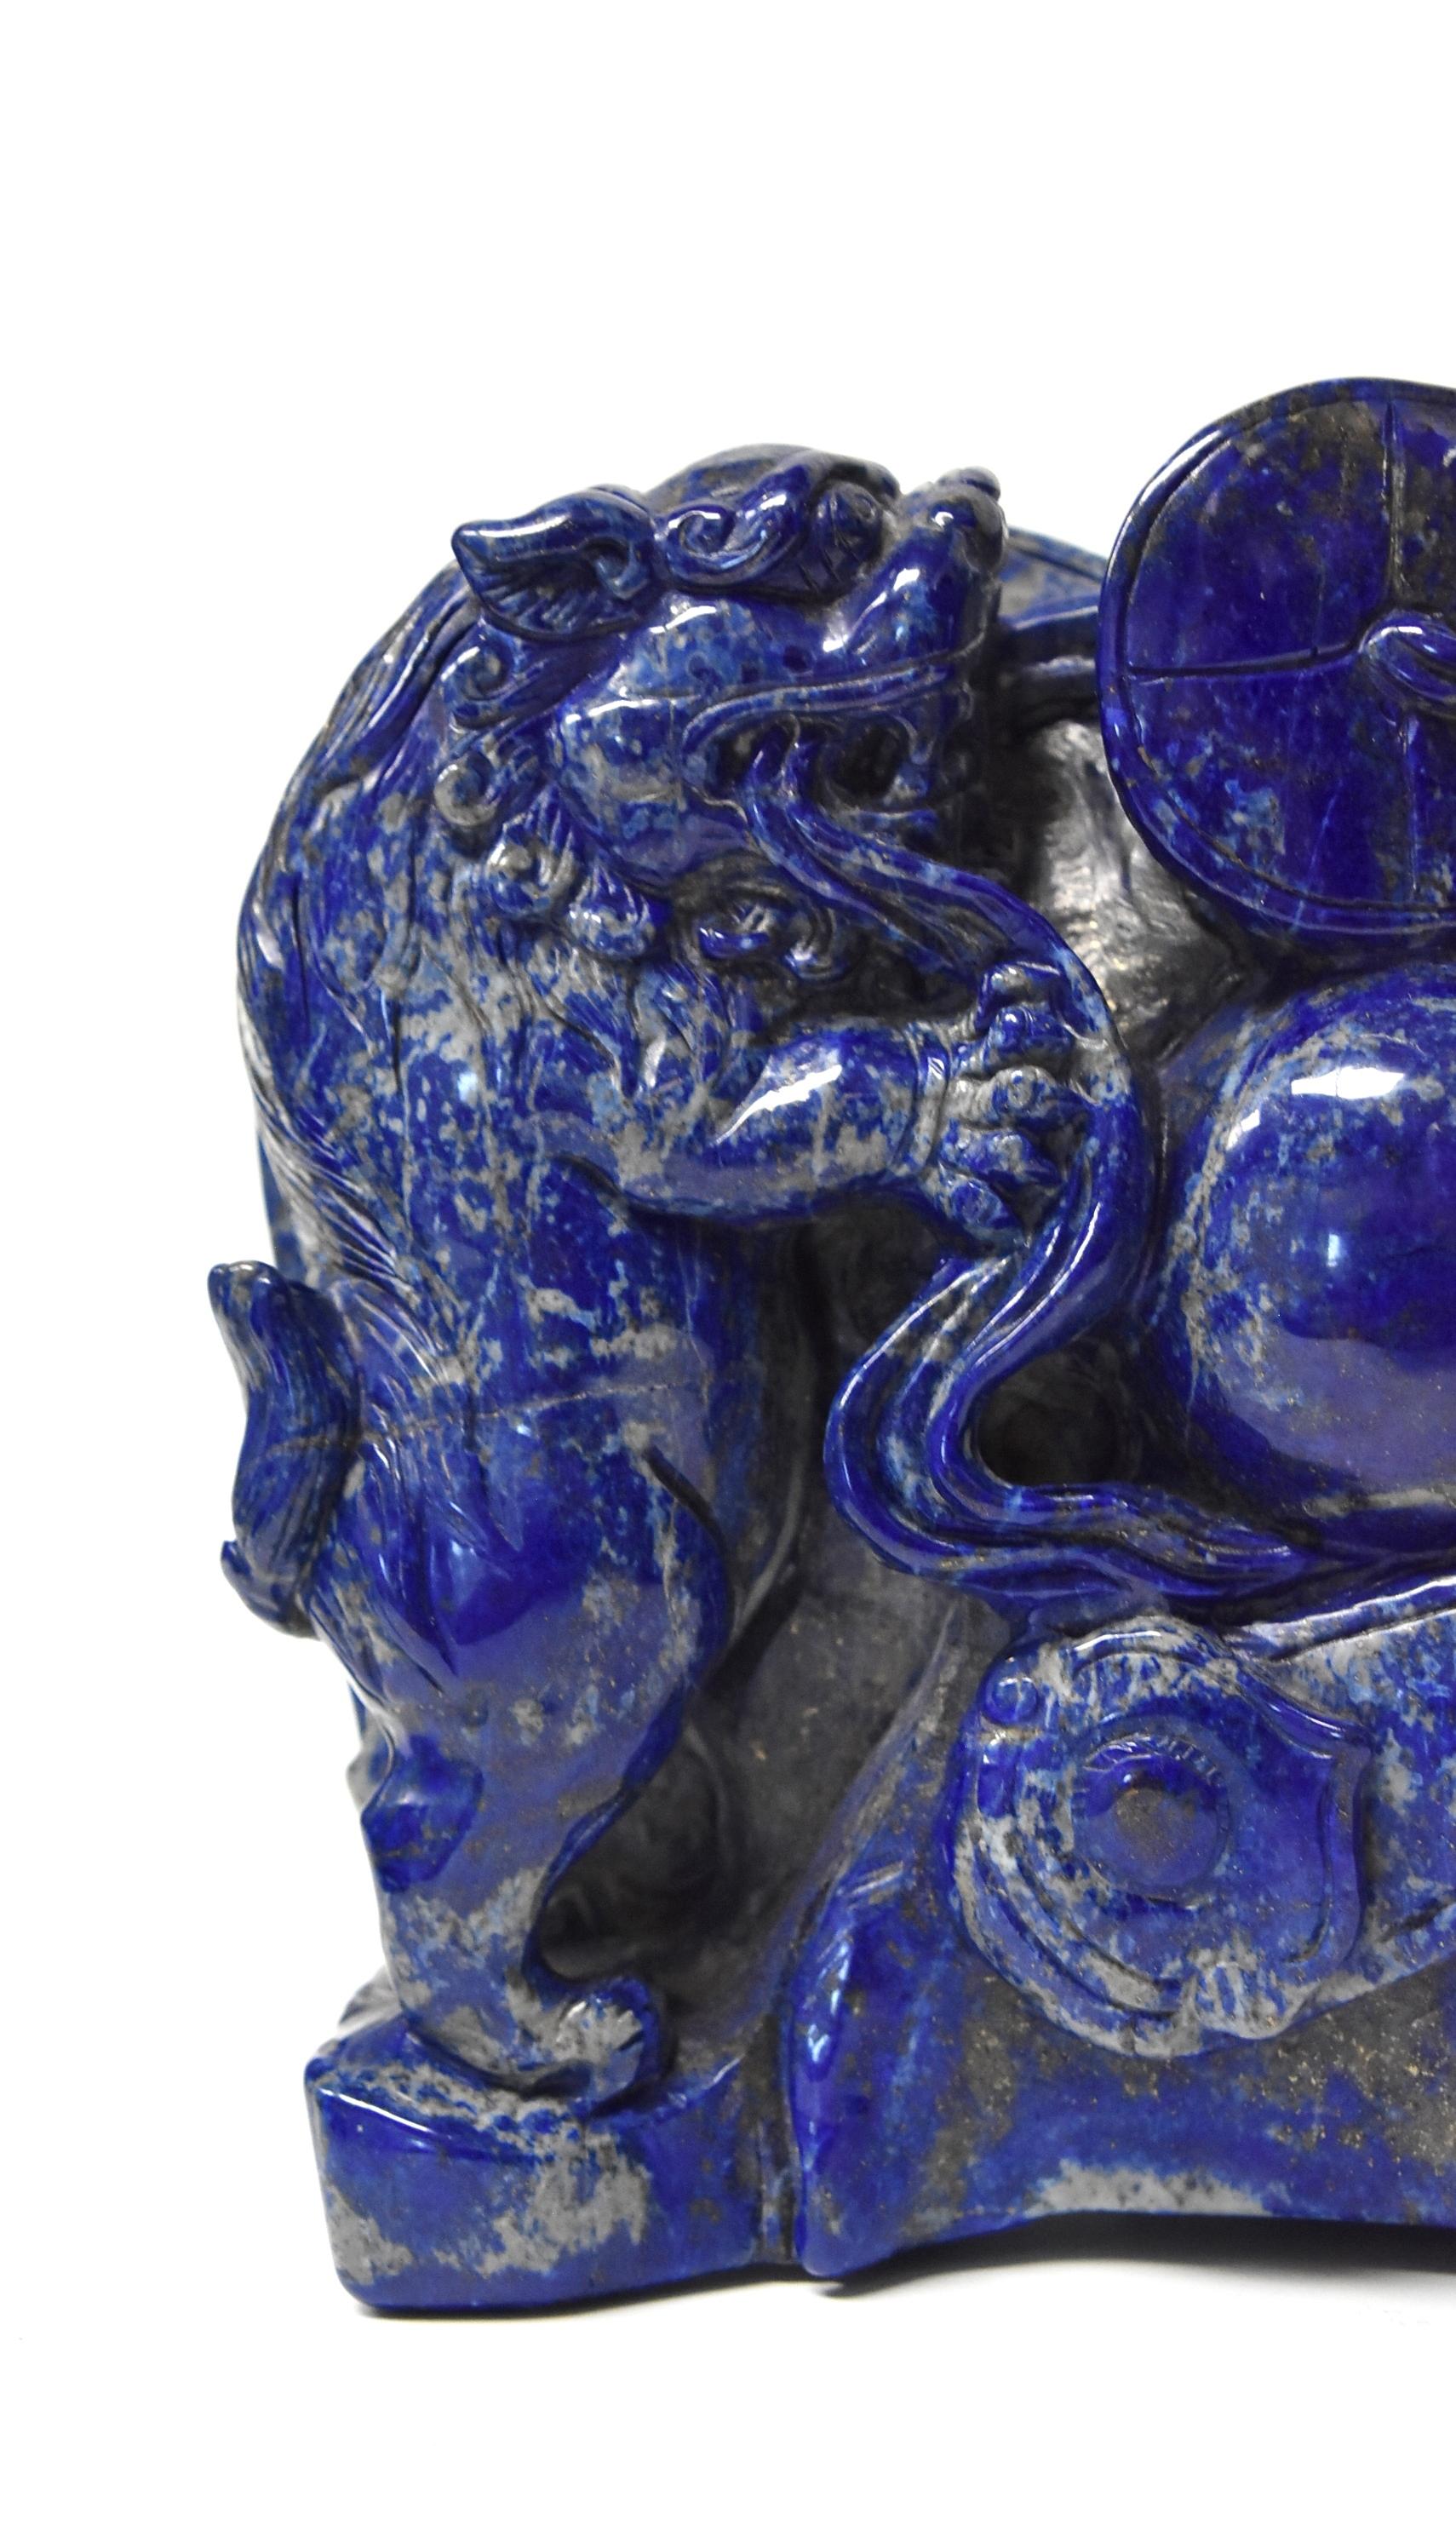 Natural Lapis Lazuli 8 lb Block with Carved Lions 6